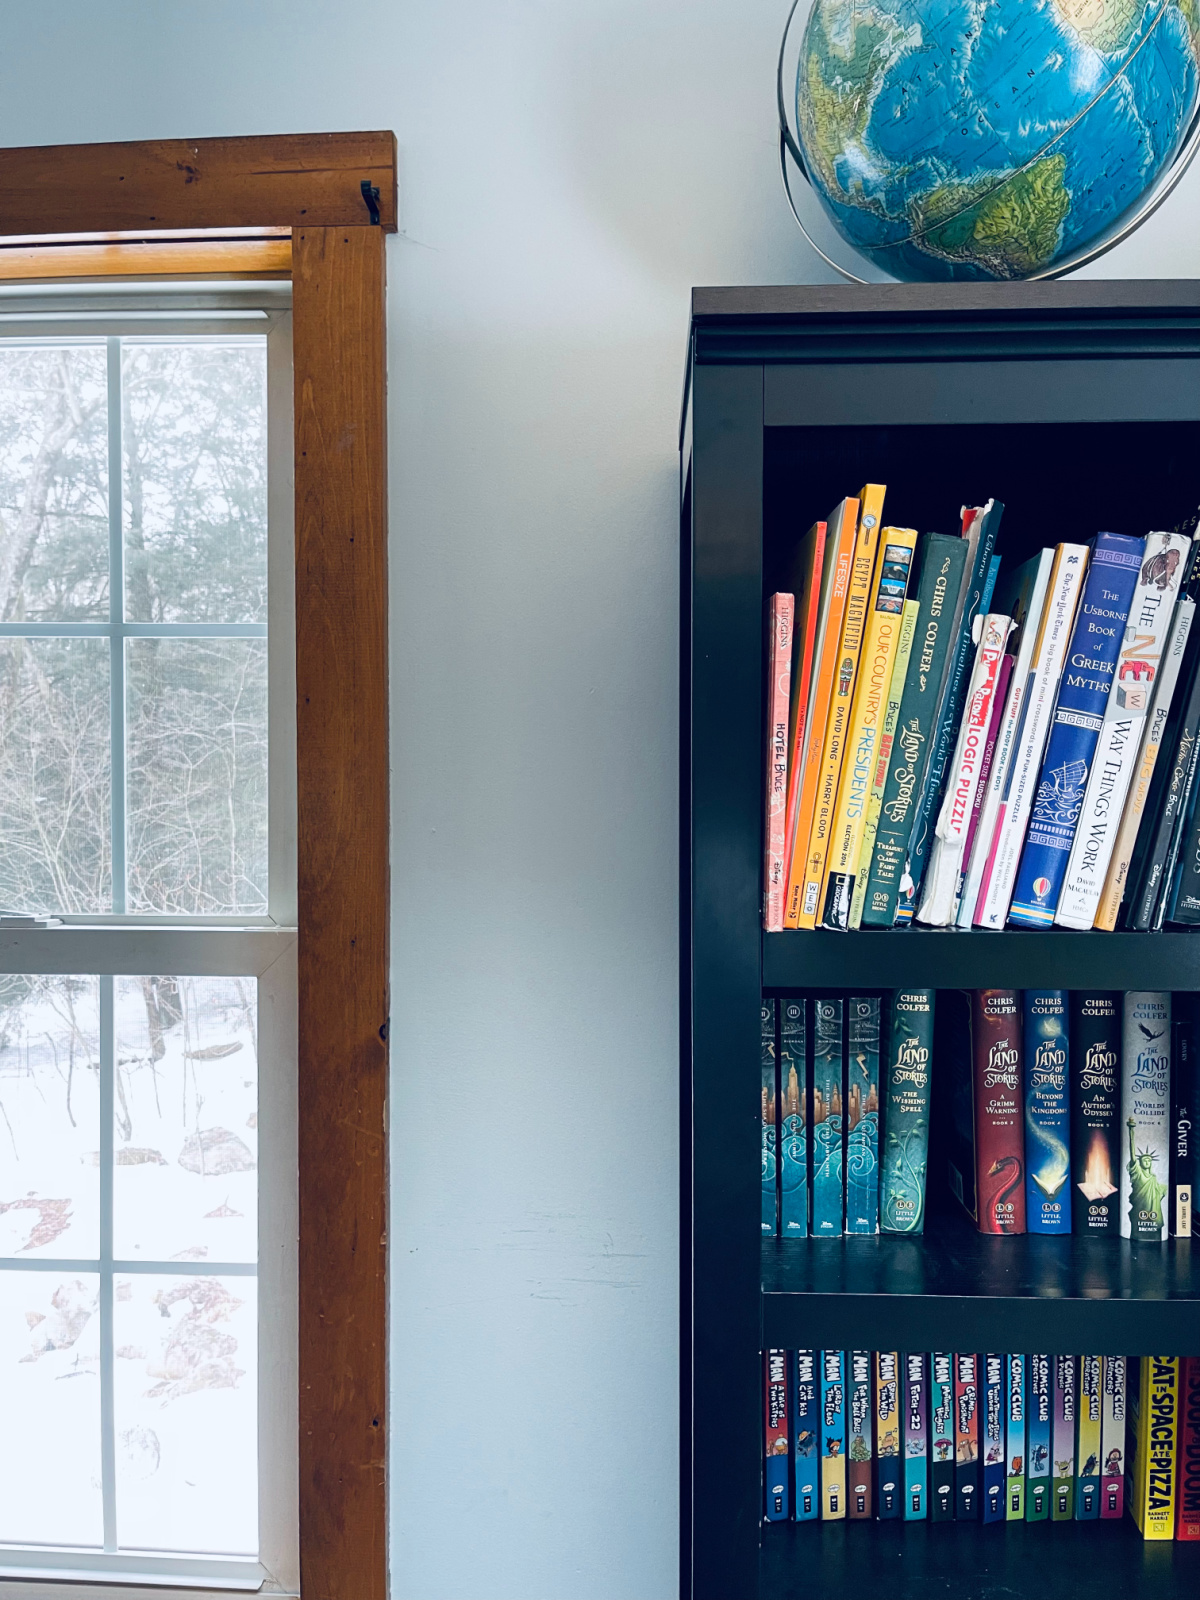 narrow black bookshelf filled with colorful books next to window, with globe on top of bookshelf.